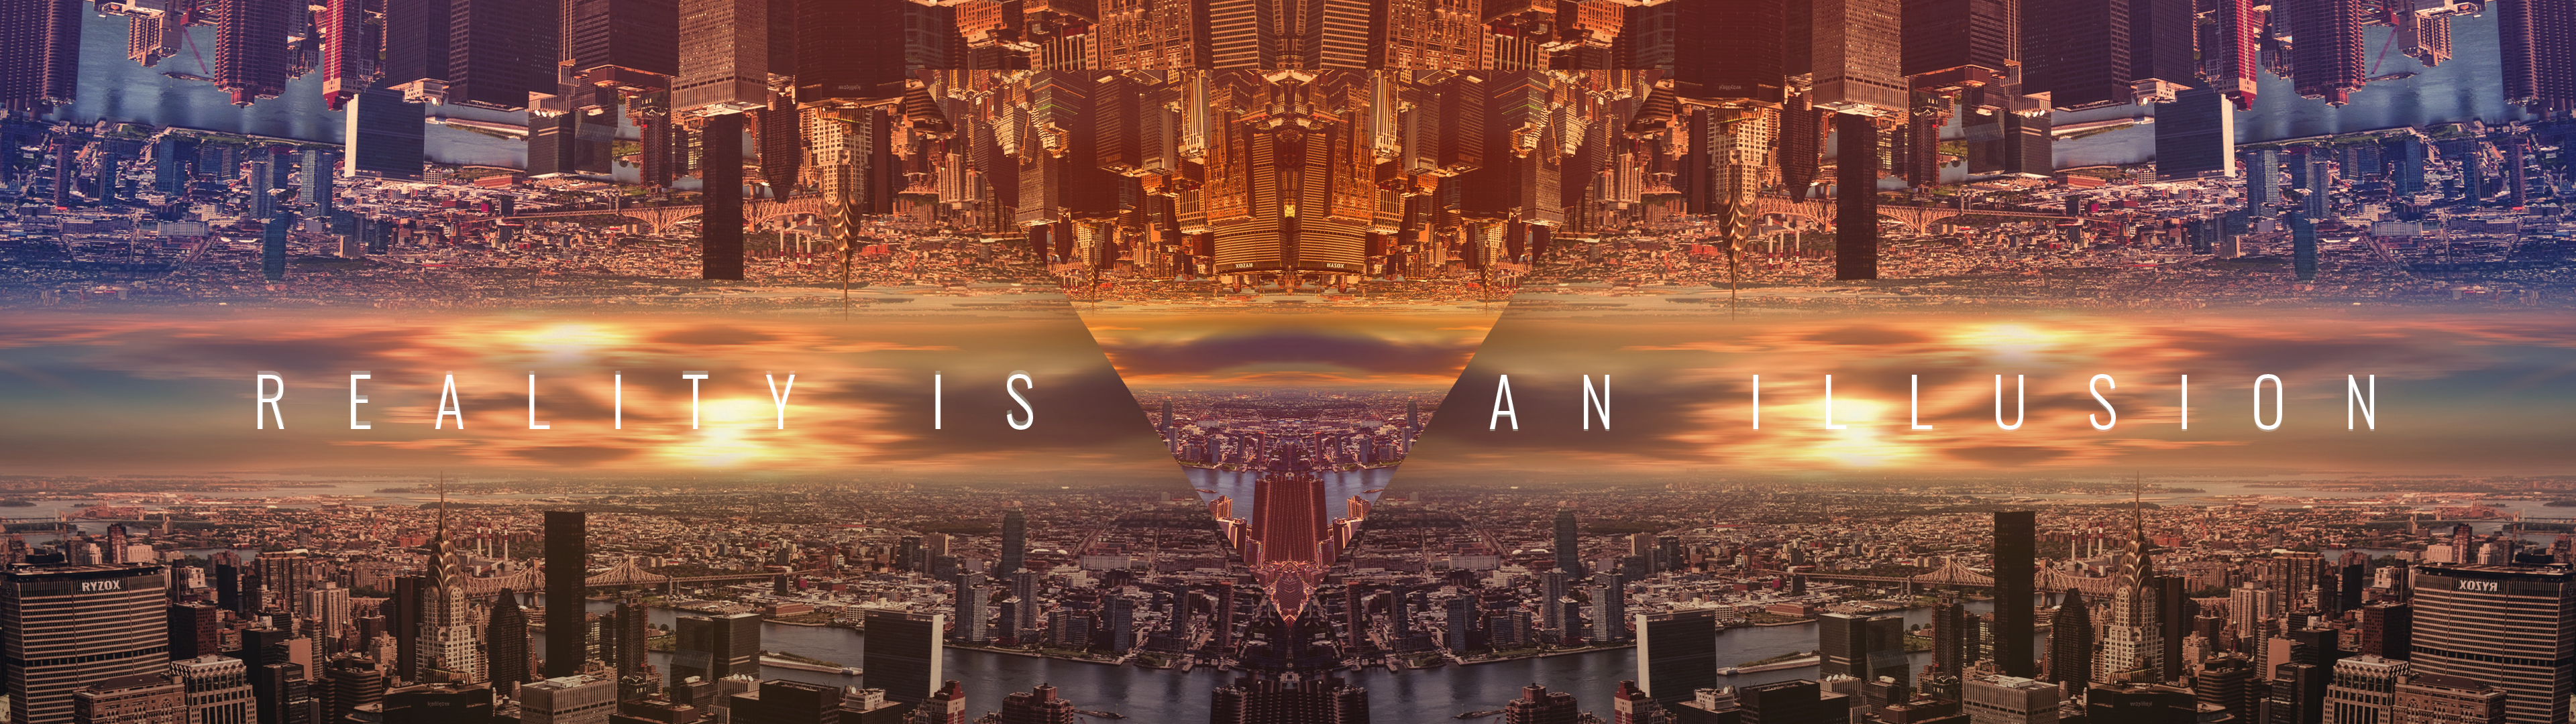 Abstract City Illusion Alternate Reality Ultrawide Wallpaper: 3840x1080